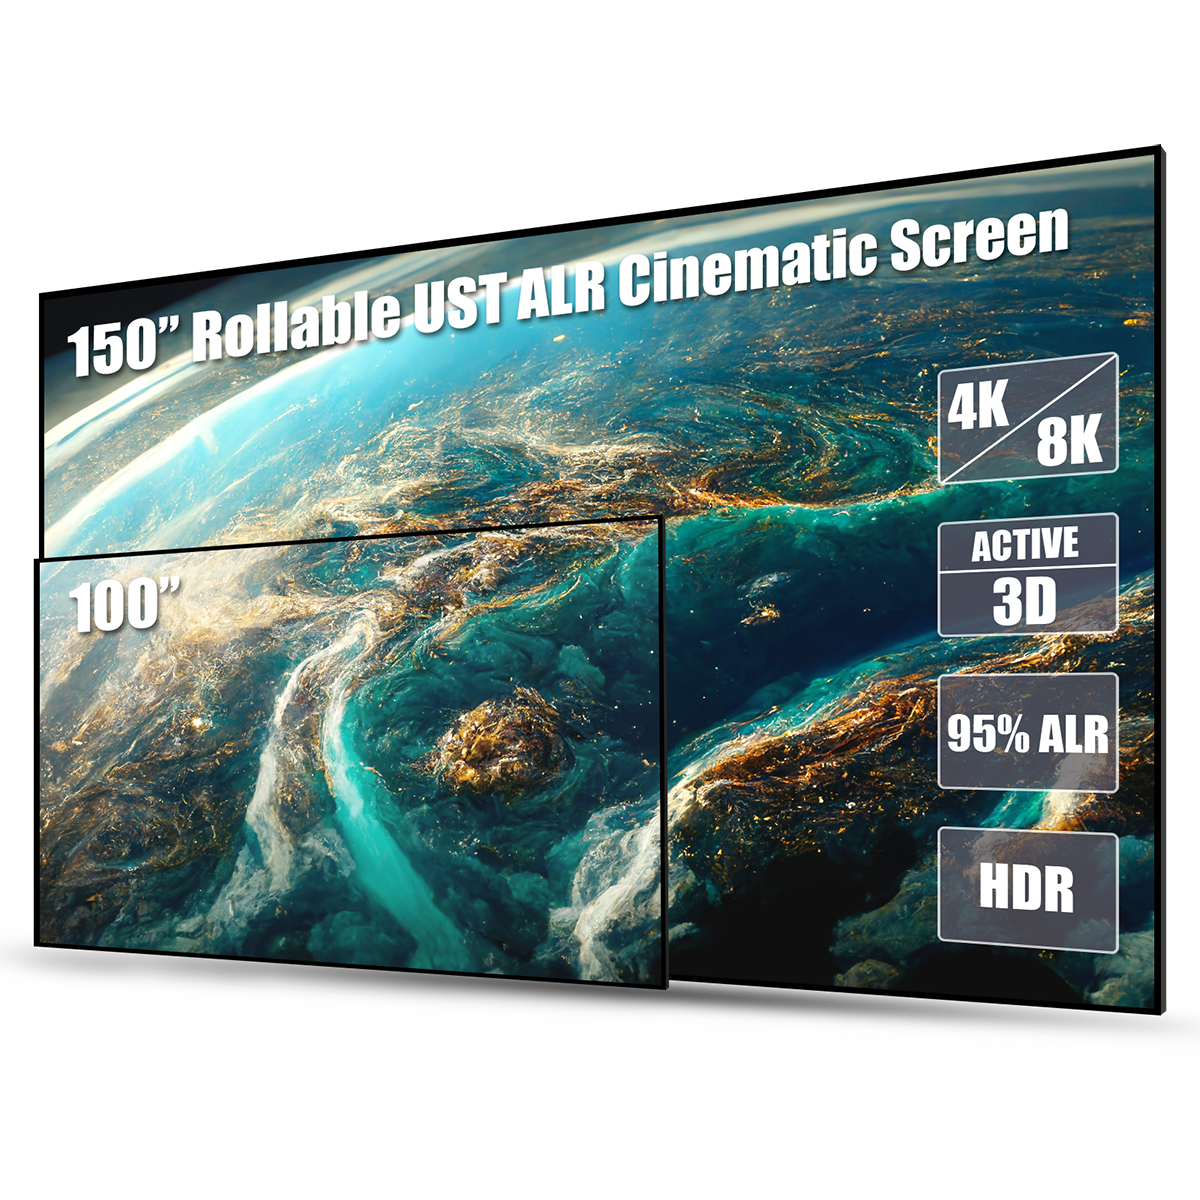 AWOL 120Inch ALR Projector Cinematic Screen UST 16:9 170° Viewing Angle Ambient 95% Ceiling Light Giant Cinema Screen